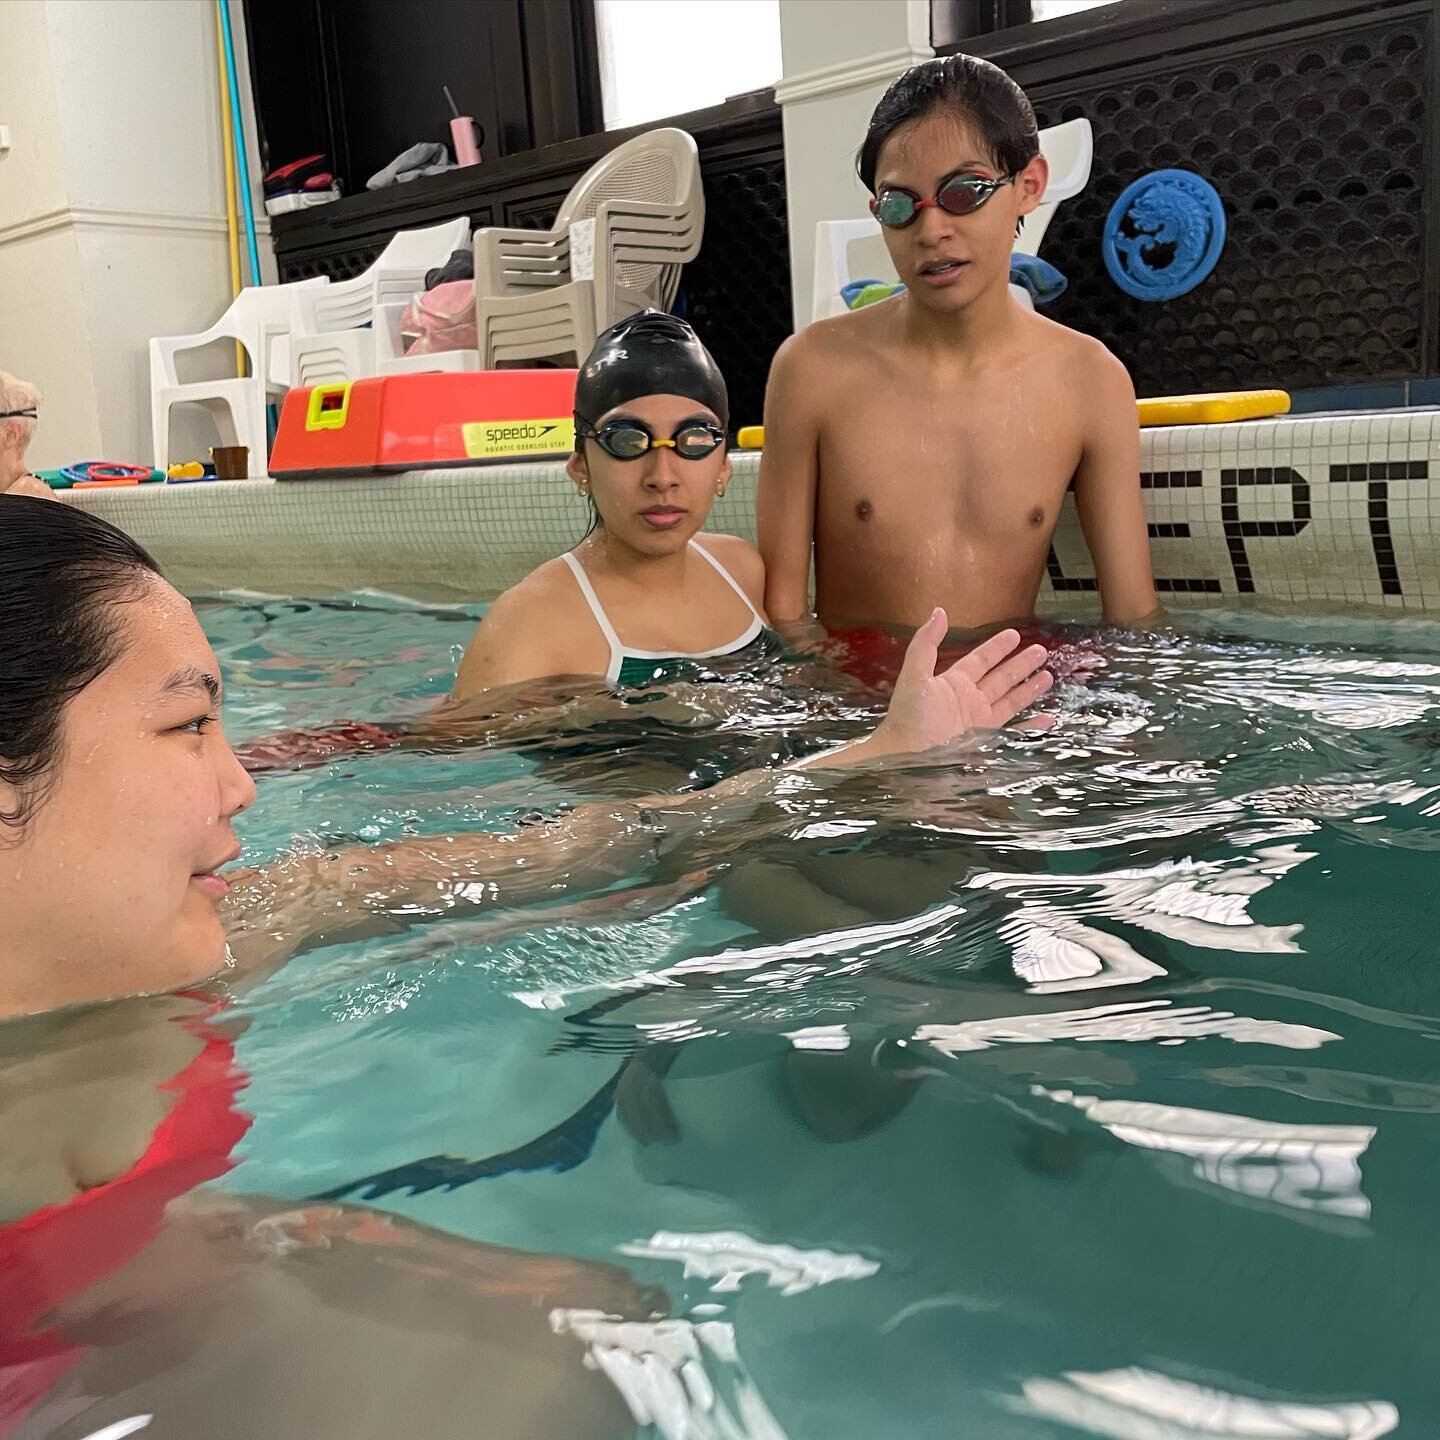 Coach Amira demonstrating proper technique while Everybody is laser focused! 

Don&rsquo;t Hesitate, sign up for a class today! 
Www.lakesideswimschool.com
(312)718-8614

🏊🏊🏊&zwj;♀️🏊🏊&zwj;♀️🏊🏊&zwj;♀️🏊🏊&zwj;♀️🏊🏊&zwj;♀️
#swimthedistance #wat